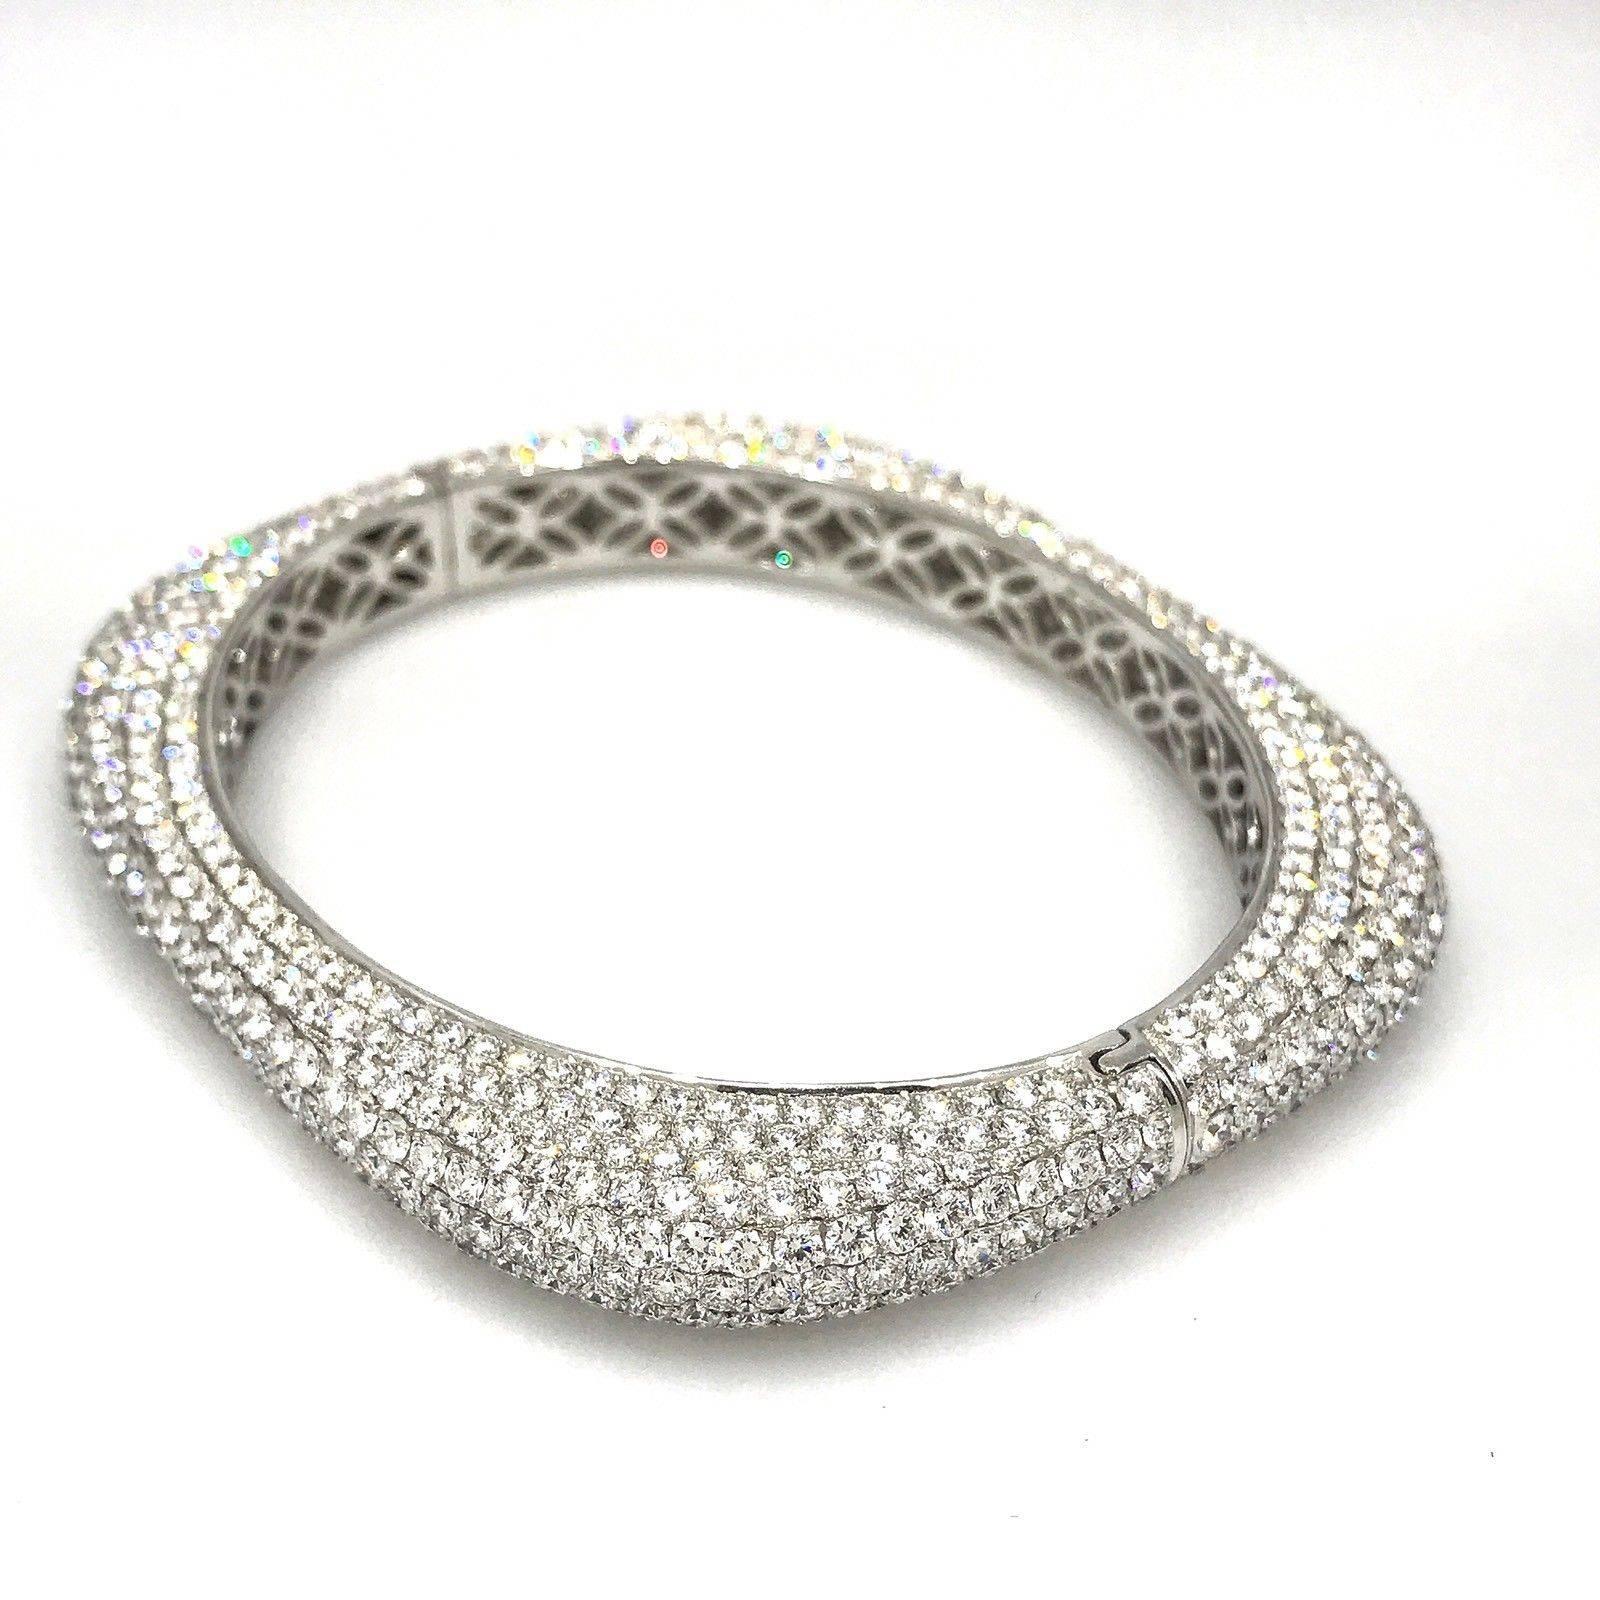 Very high quality diamond pave bangle bracelet with rounded square shape with oval opening, featuring 22.59 carats of round brilliant full cut diamonds, pave set over entire bangle. Diamond quality is VS clarity and G color. Excellent craftsmanship.